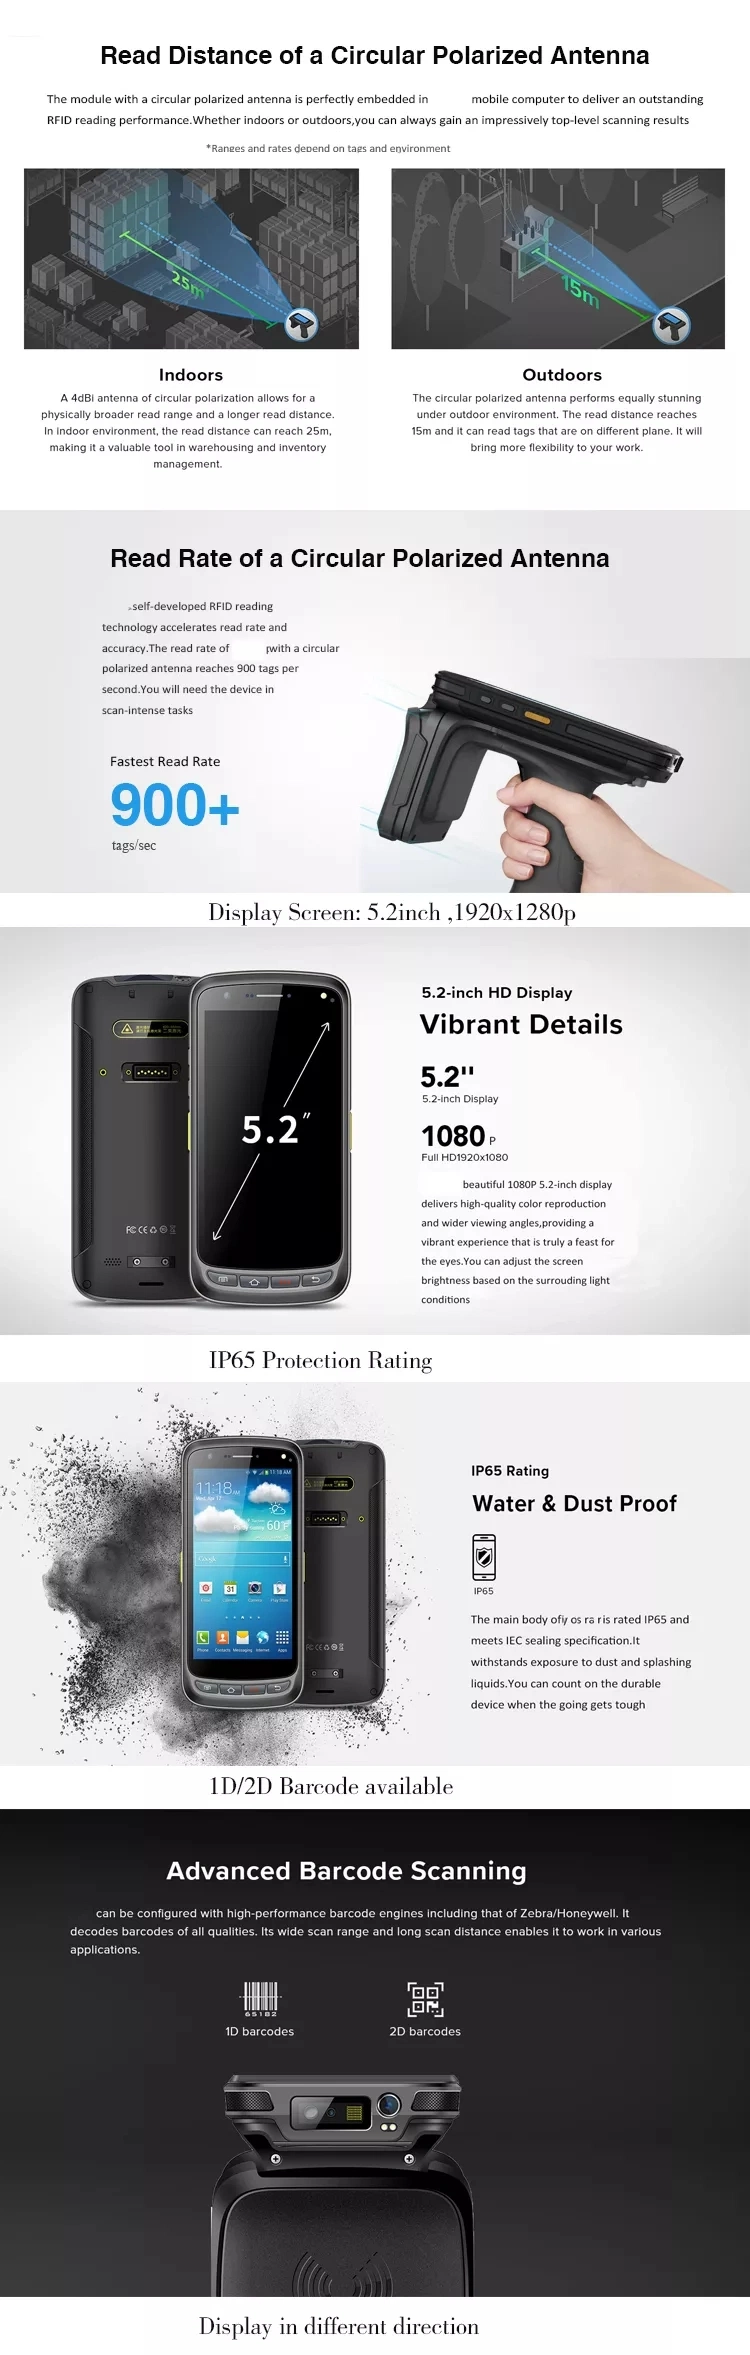 15 Meters Android 8.1 Impinj R2000 Long Range PDA UHF RFID Handheld Reader for Warehouse Inventory Handhelds with WiFi NFC Barcode GPS Camera UHF IP67